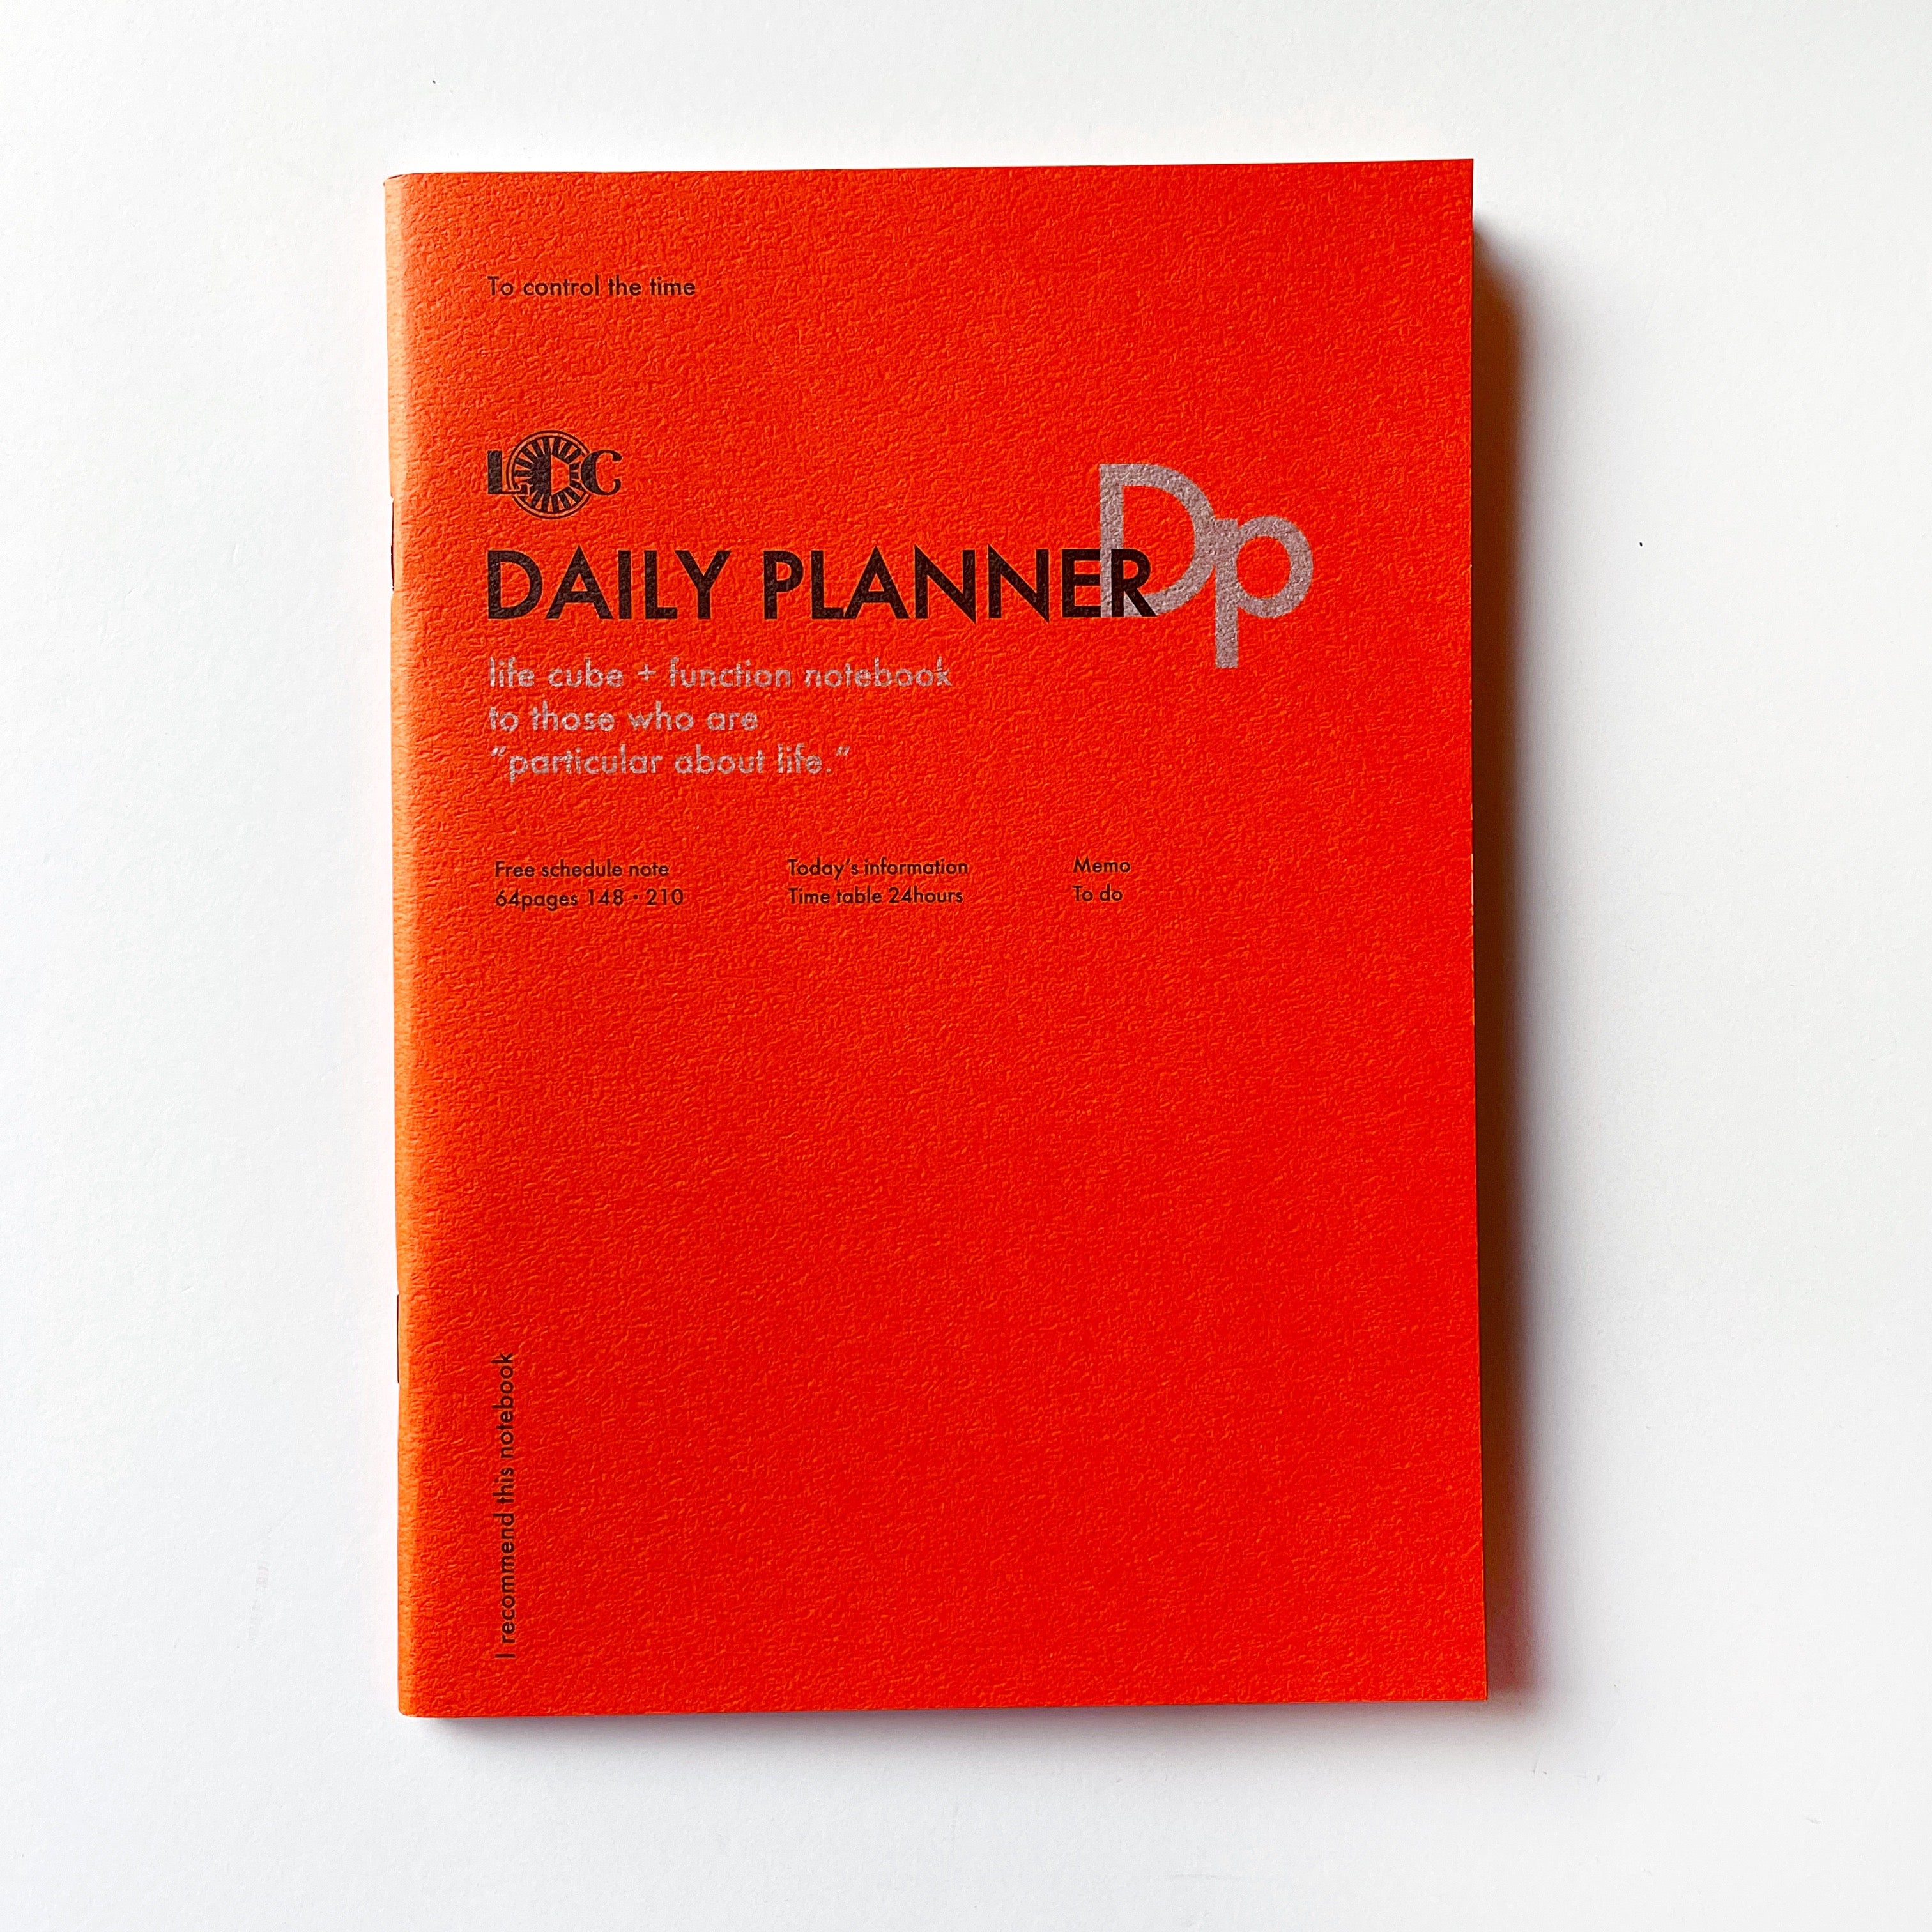 Red background with black text says, “Daily Planner” and grey text says, “life cube + function notebook, to those who are ‘particular about life’. “